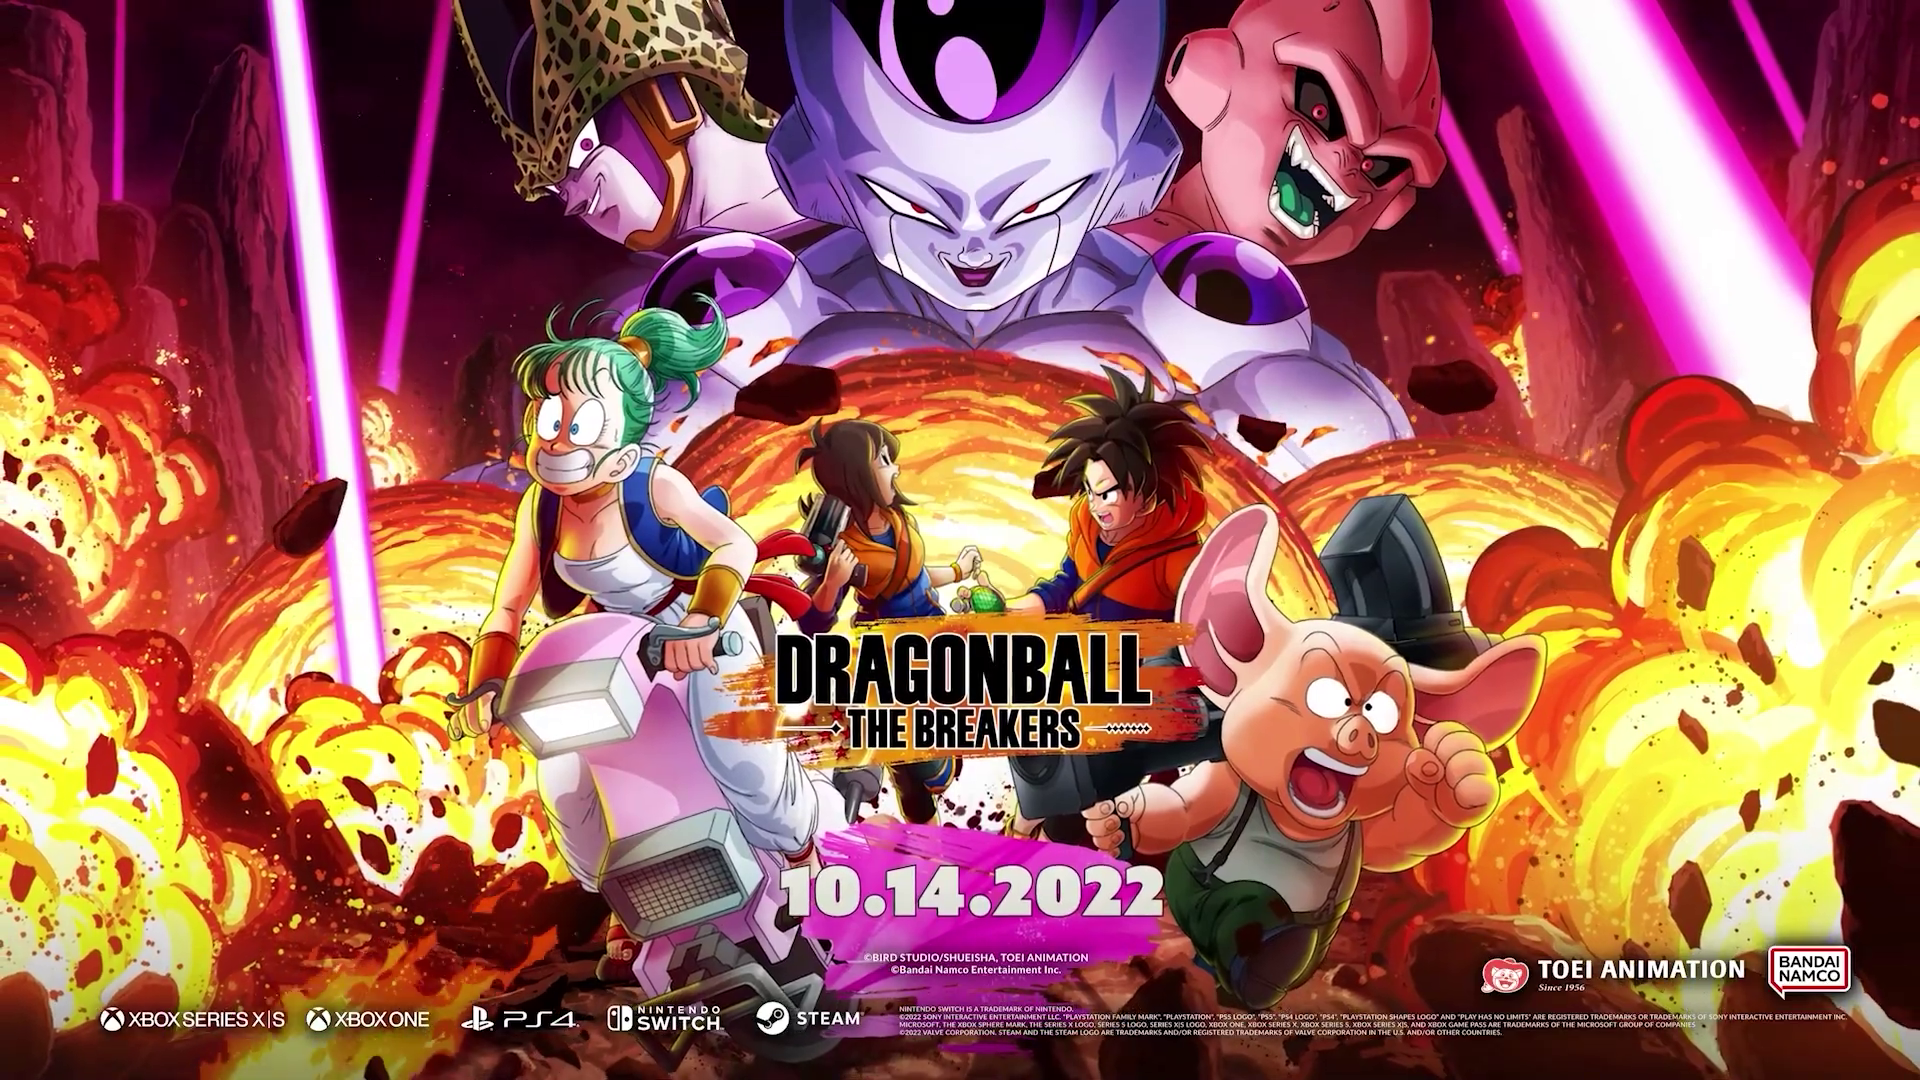 Dragon Ball : The Breakers is getting cross play for it's 1 year